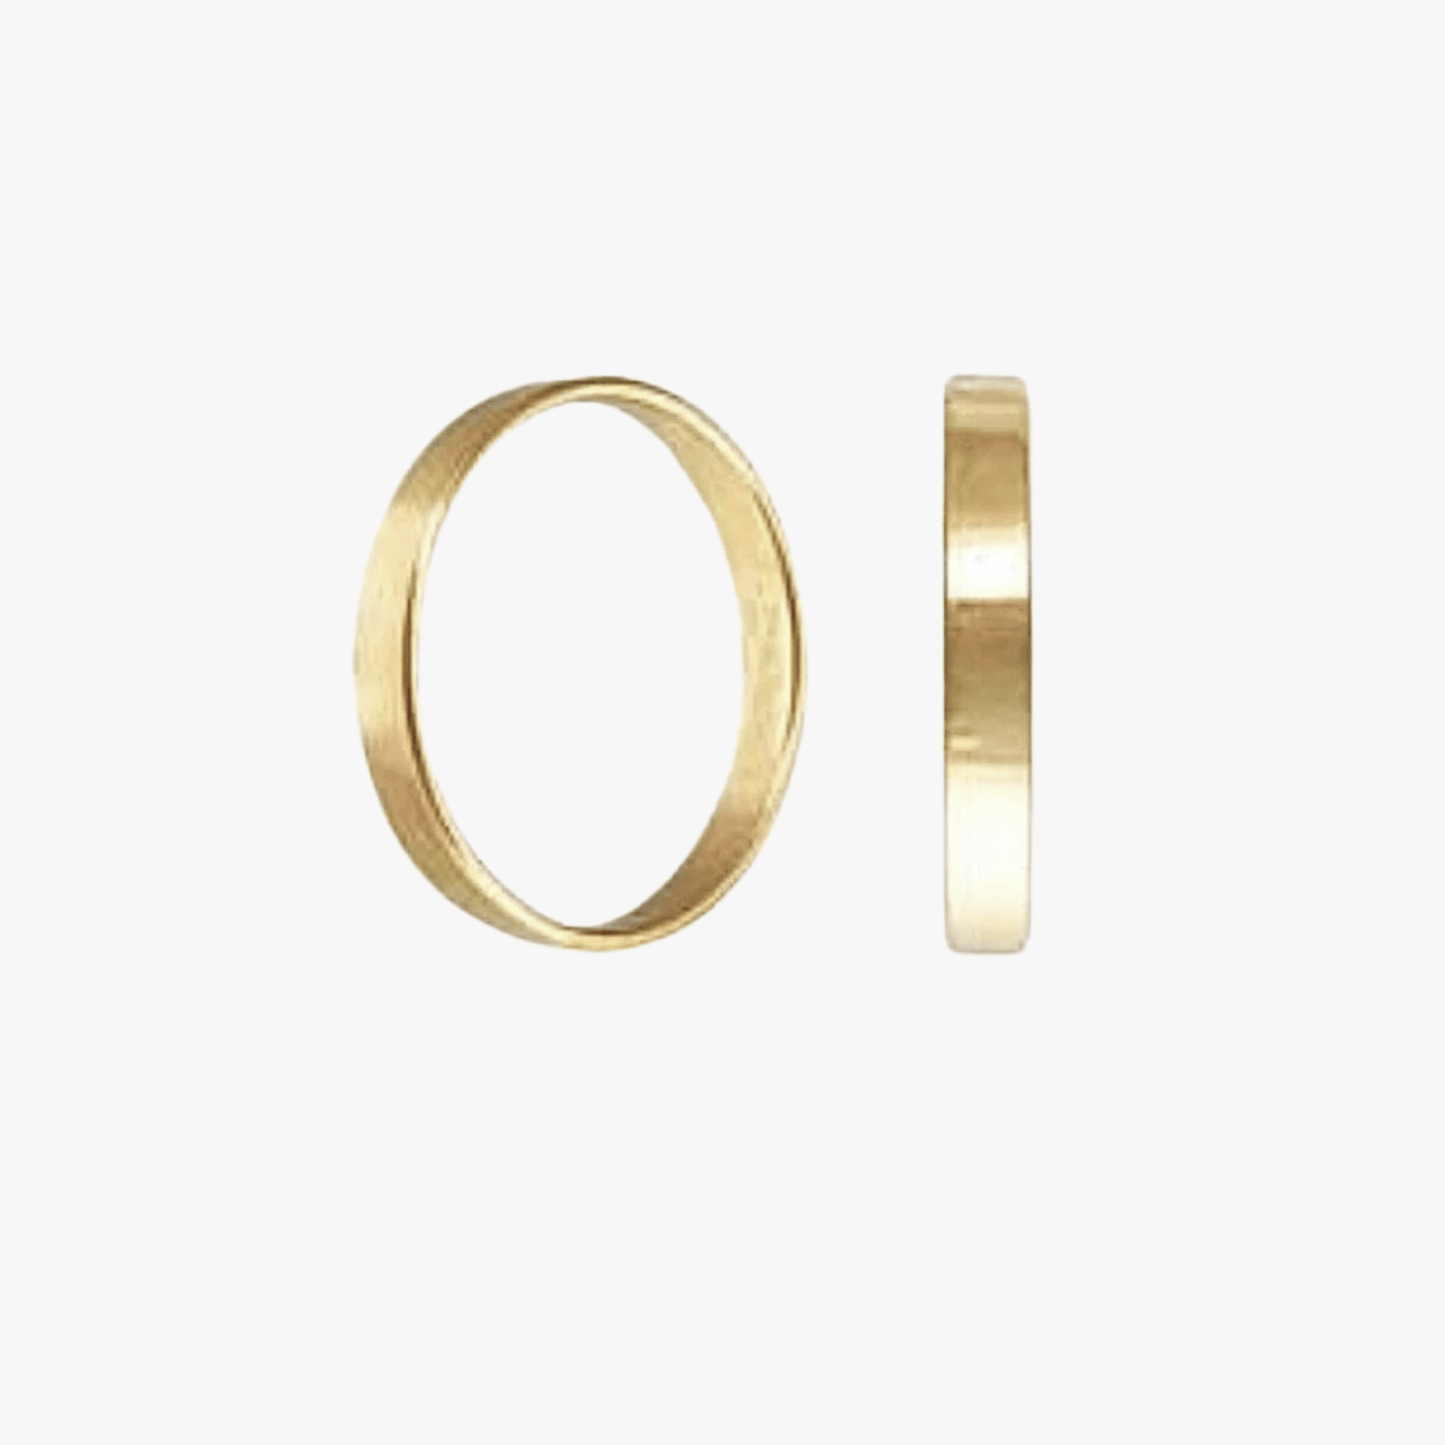 2.5 mm Gold Filled Thin Band